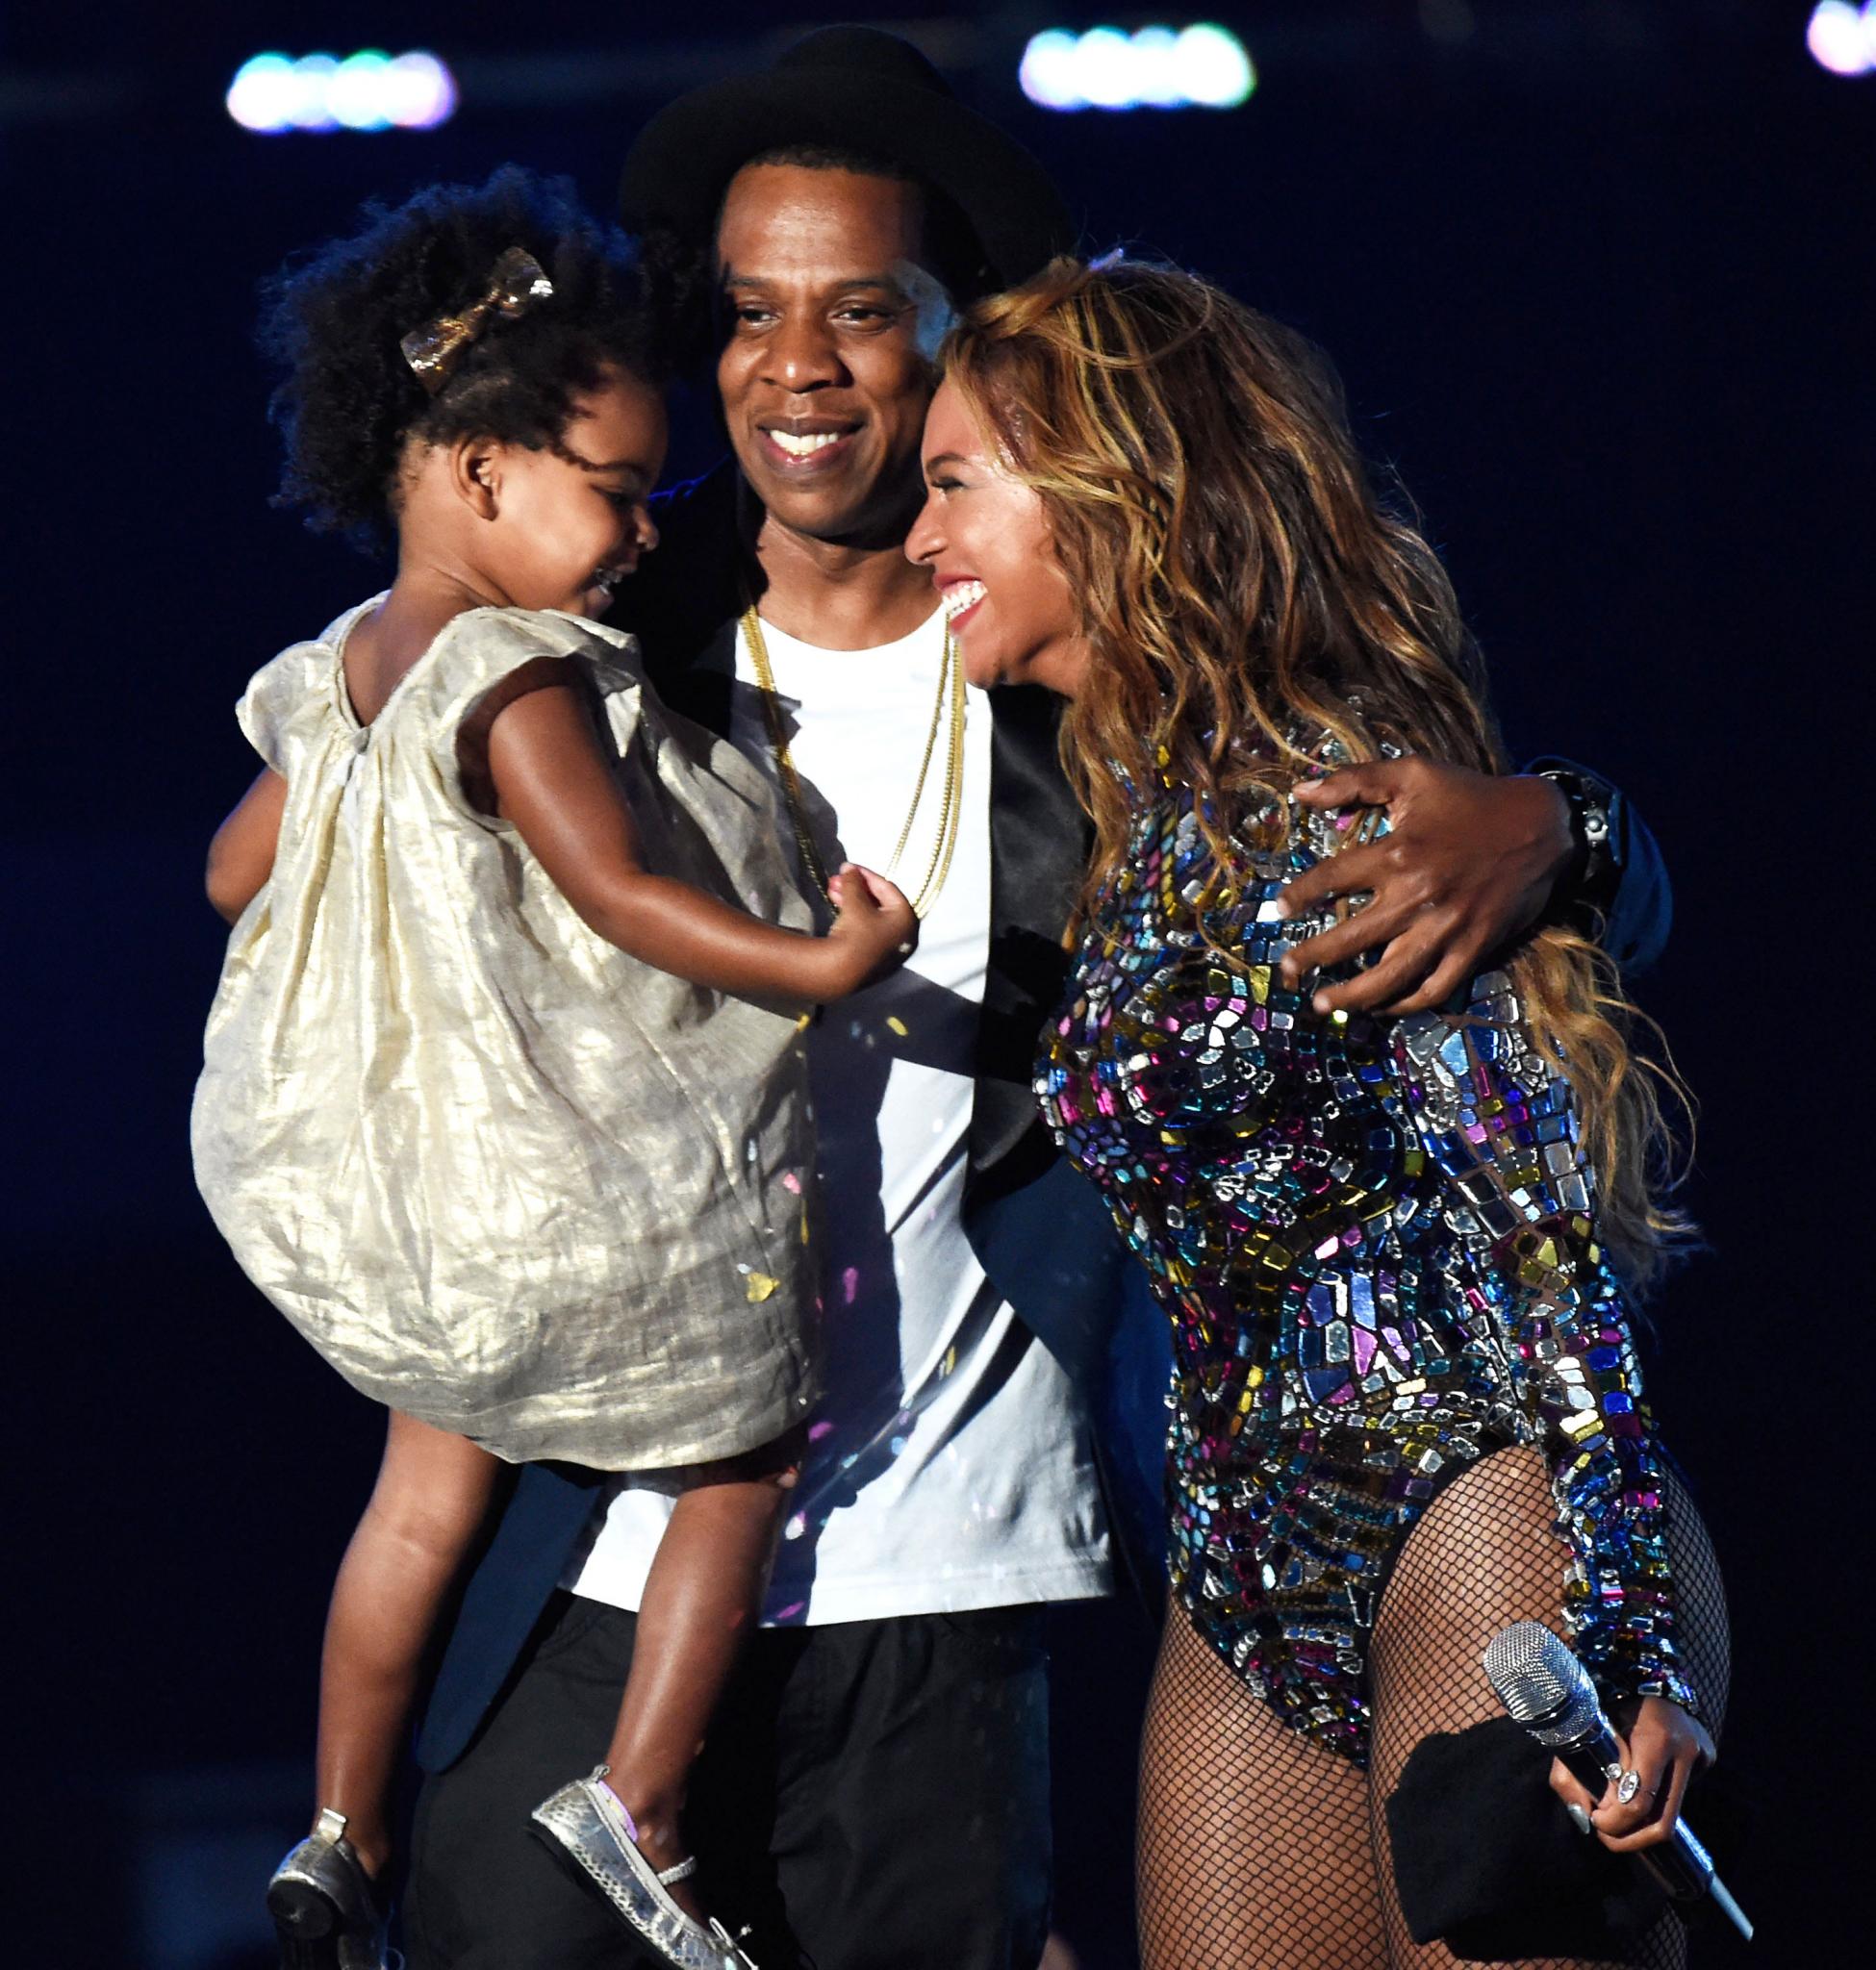 Photo Fab: Beyonce, Blue Ivy and Jay Z Are a United Front at VMAs
